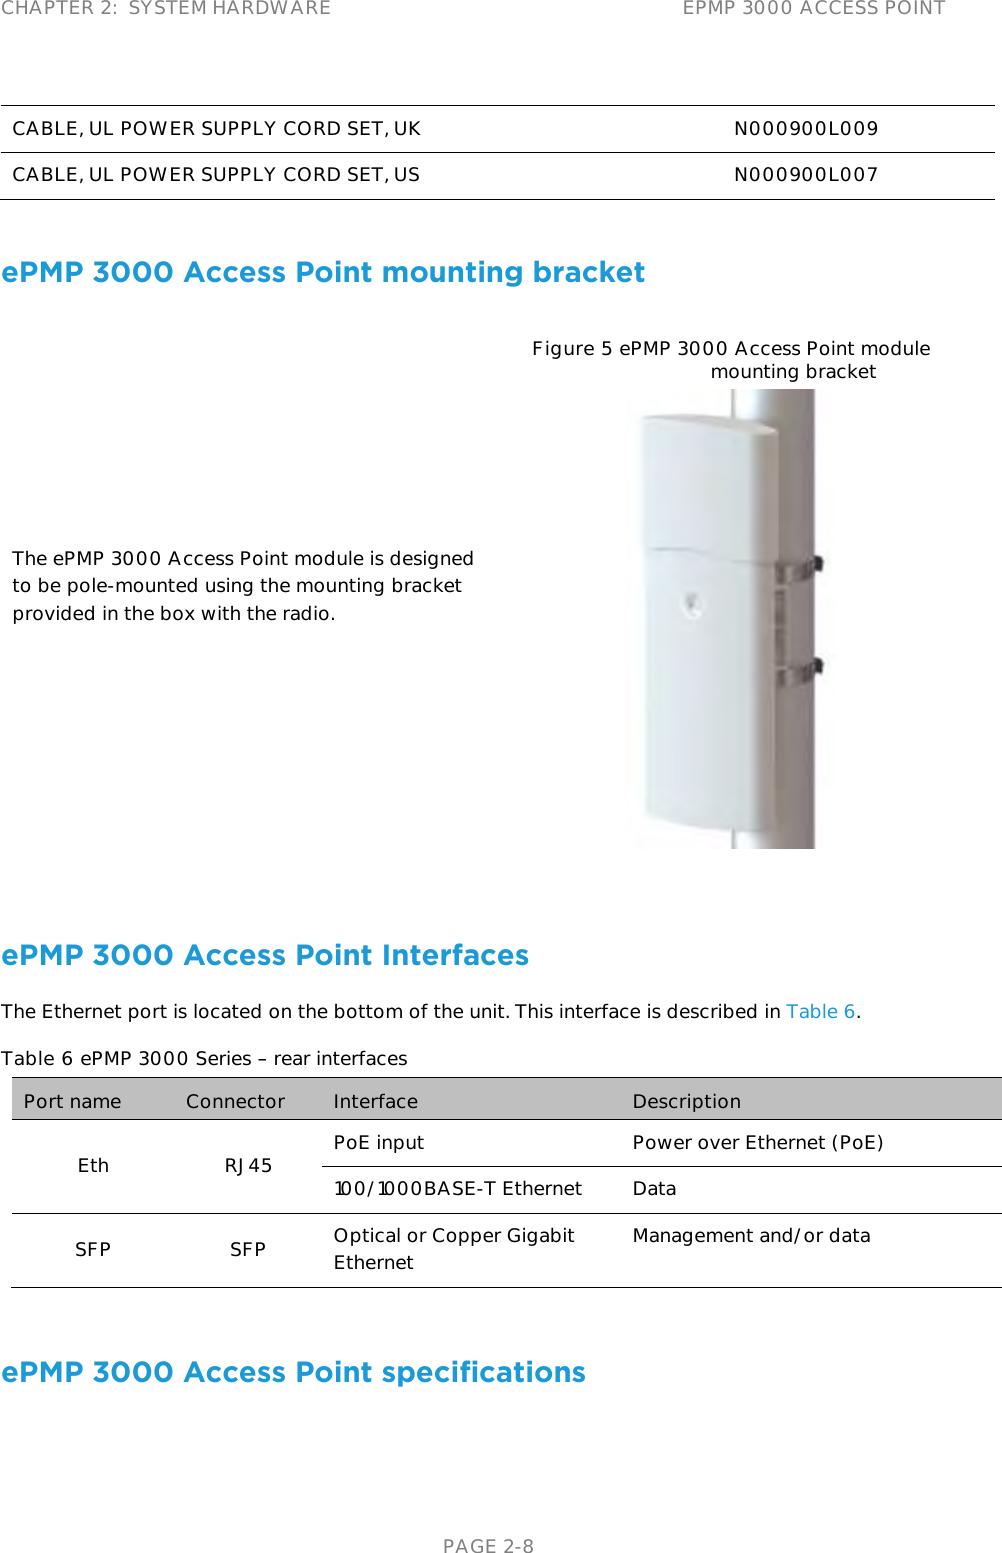 CHAPTER 2:  SYSTEM HARDWARE EPMP 3000 ACCESS POINT   PAGE 2-8 CABLE, UL POWER SUPPLY CORD SET, UK N000900L009 CABLE, UL POWER SUPPLY CORD SET, US N000900L007  ePMP 3000 Access Point mounting bracket The ePMP 3000 Access Point module is designed to be pole-mounted using the mounting bracket provided in the box with the radio.   Figure 5 ePMP 3000 Access Point module mounting bracket   ePMP 3000 Access Point Interfaces The Ethernet port is located on the bottom of the unit. This interface is described in Table 6. Table 6 ePMP 3000 Series   rear interfaces Port name Connector Interface Description Eth RJ45 PoE input Power over Ethernet (PoE) 100/1000BASE-T Ethernet Data SFP SFP Optical or Copper Gigabit Ethernet Management and/or data  ePMP 3000 Access Point specifications 